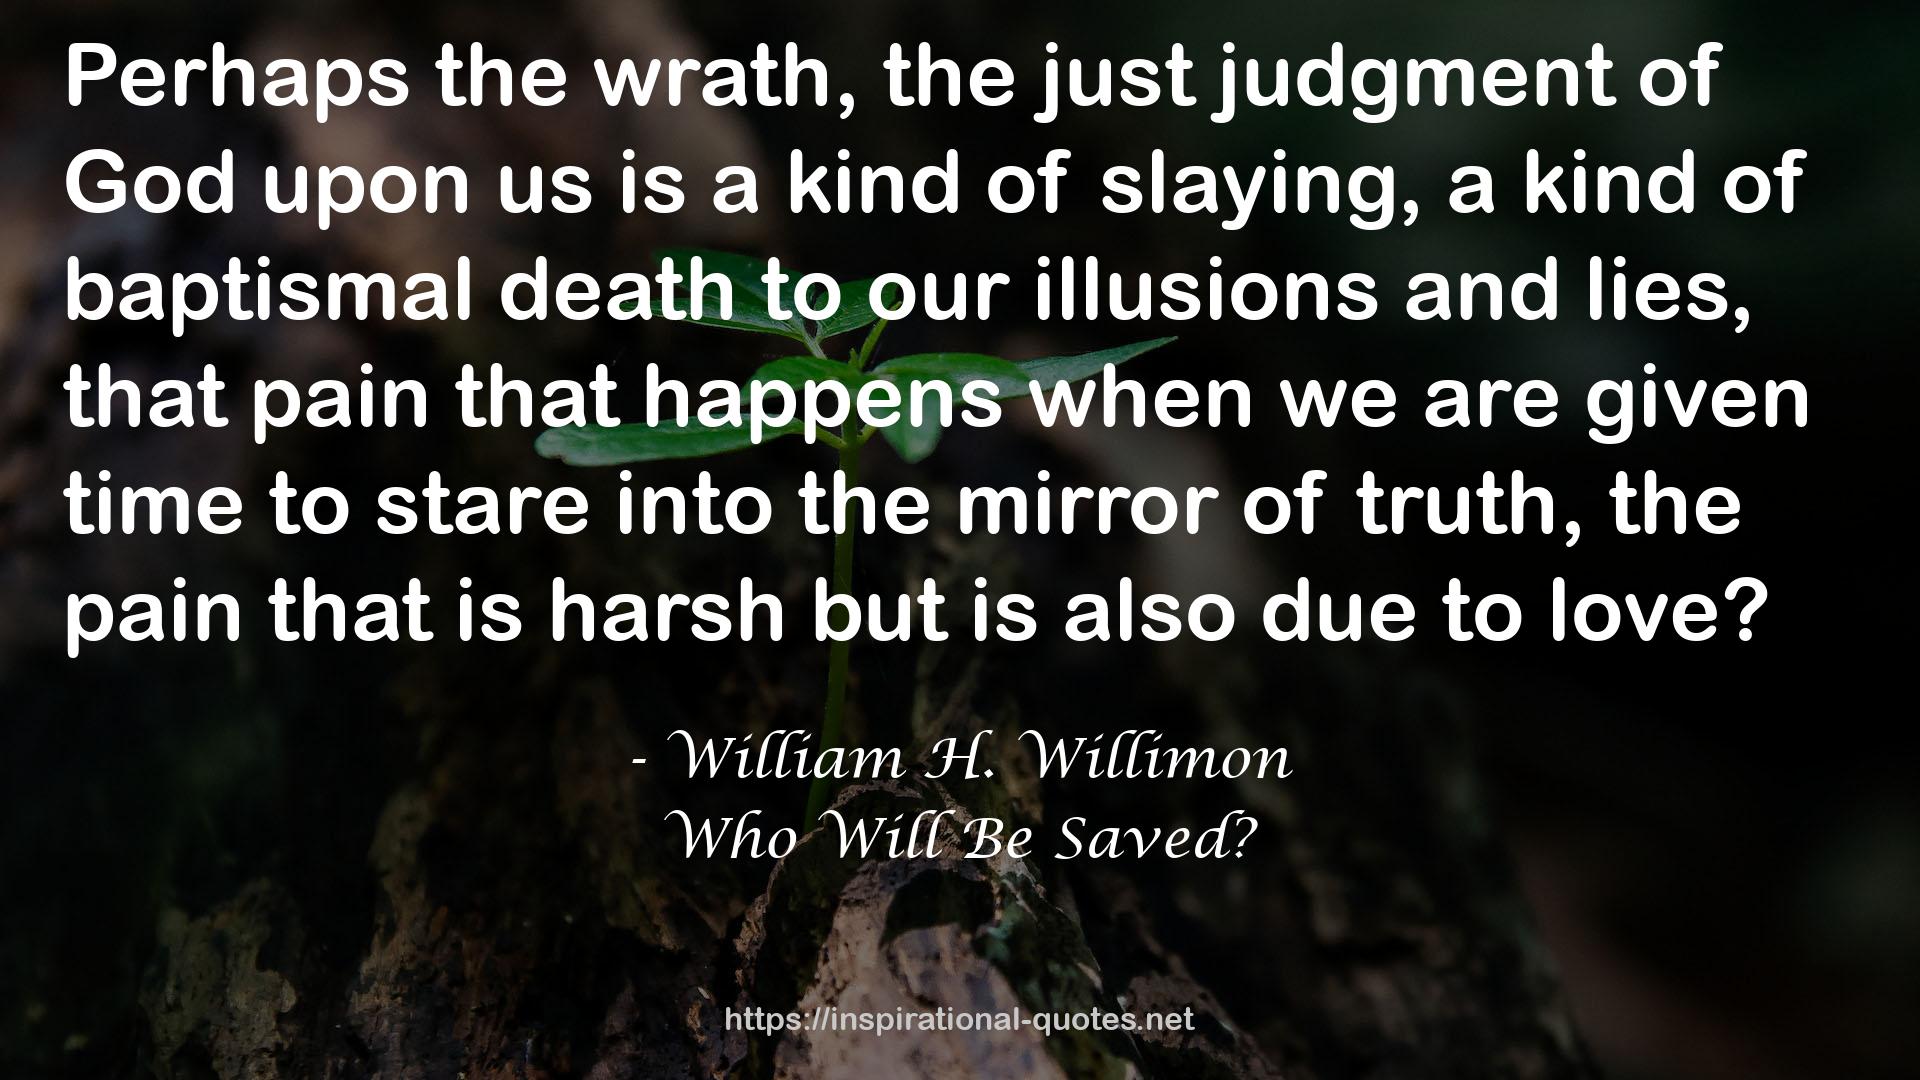 Who Will Be Saved? QUOTES